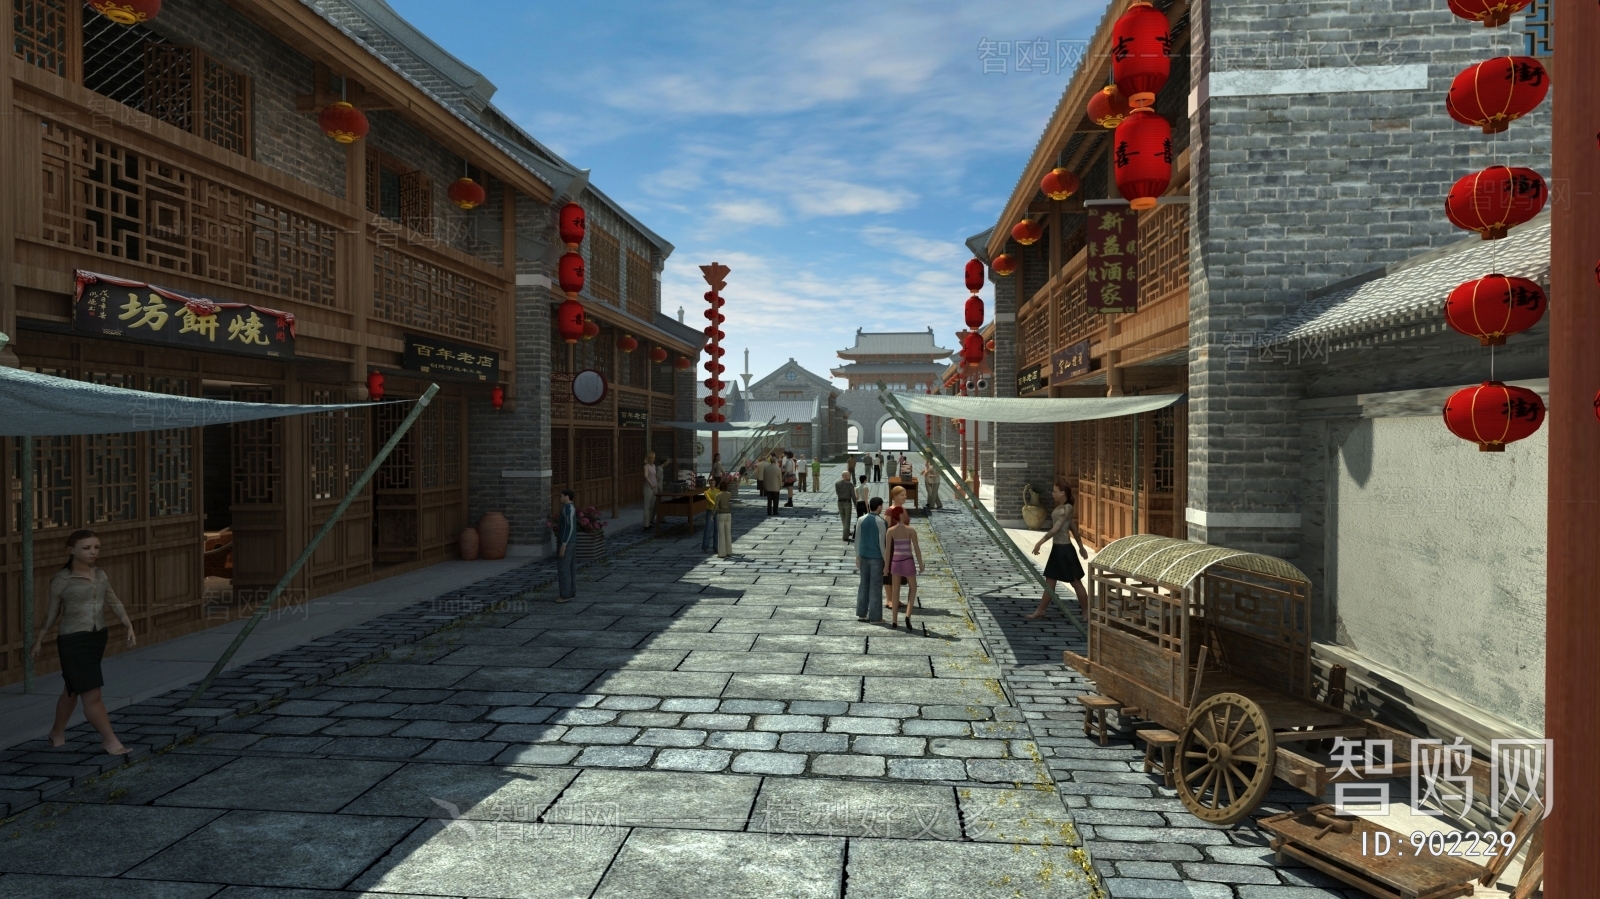 New Chinese Style Ancient Architectural Buildings